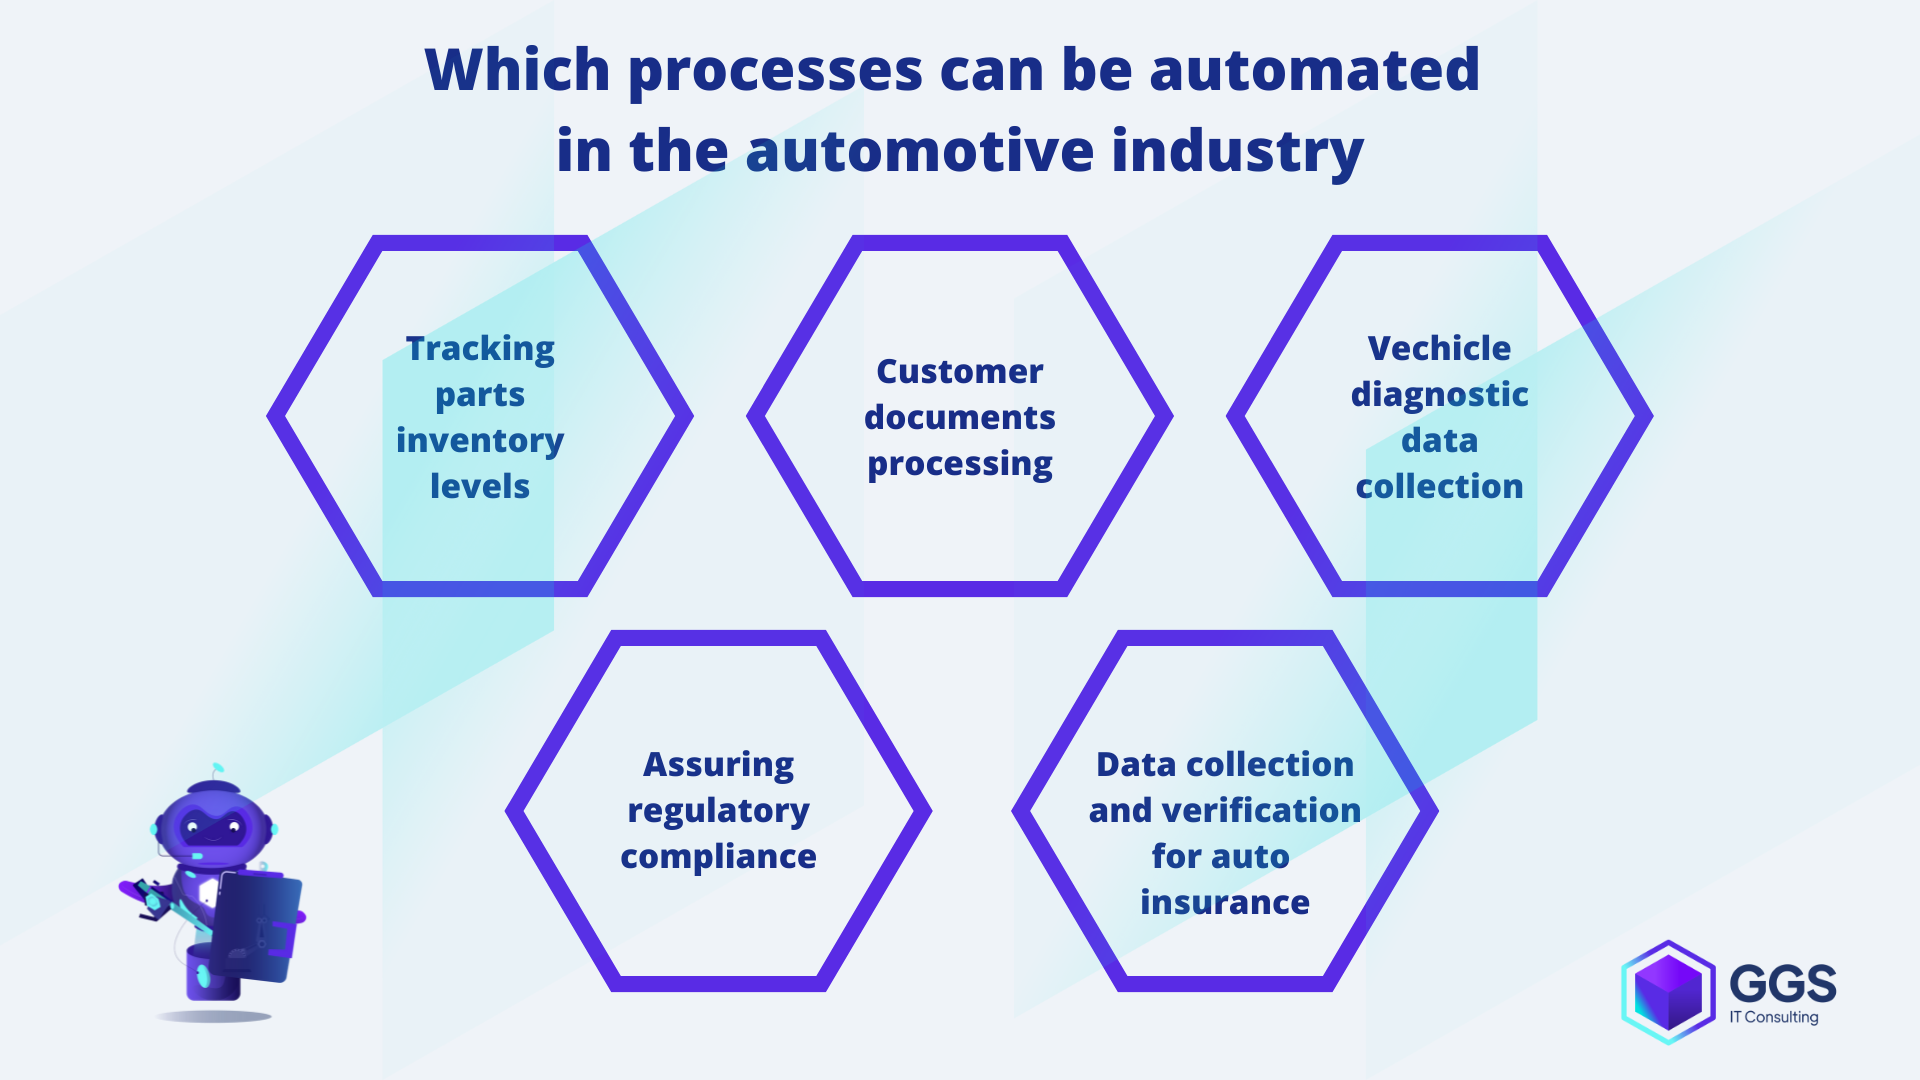 RPA cases in the automotive industry